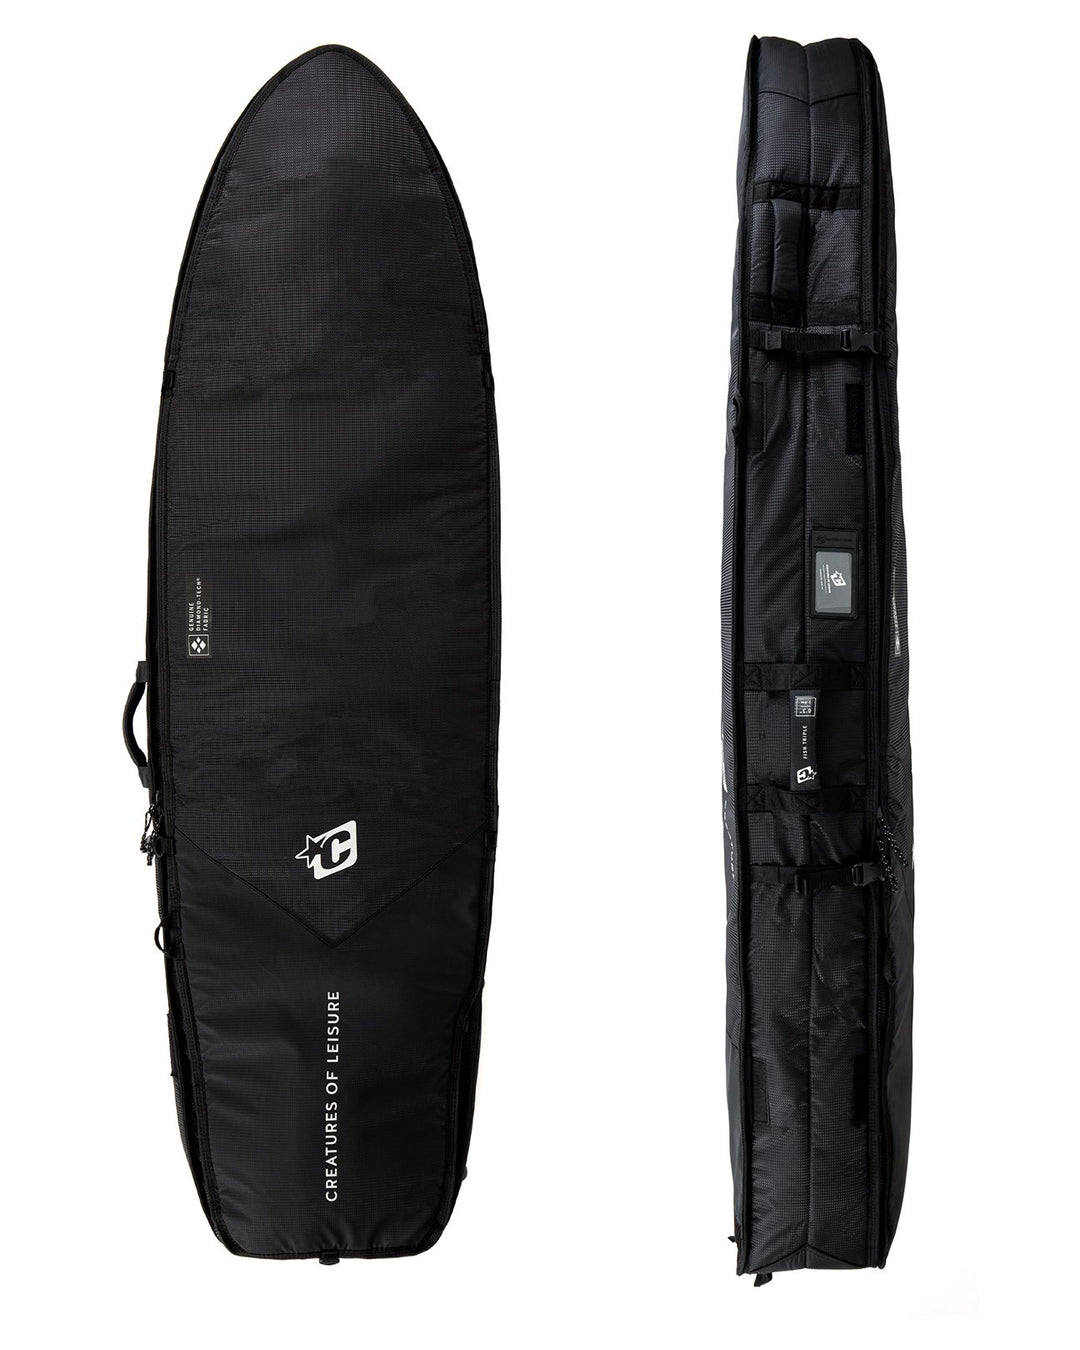 Triple Fish Boardcover - Fish Boardcover for Serious Surf Travel